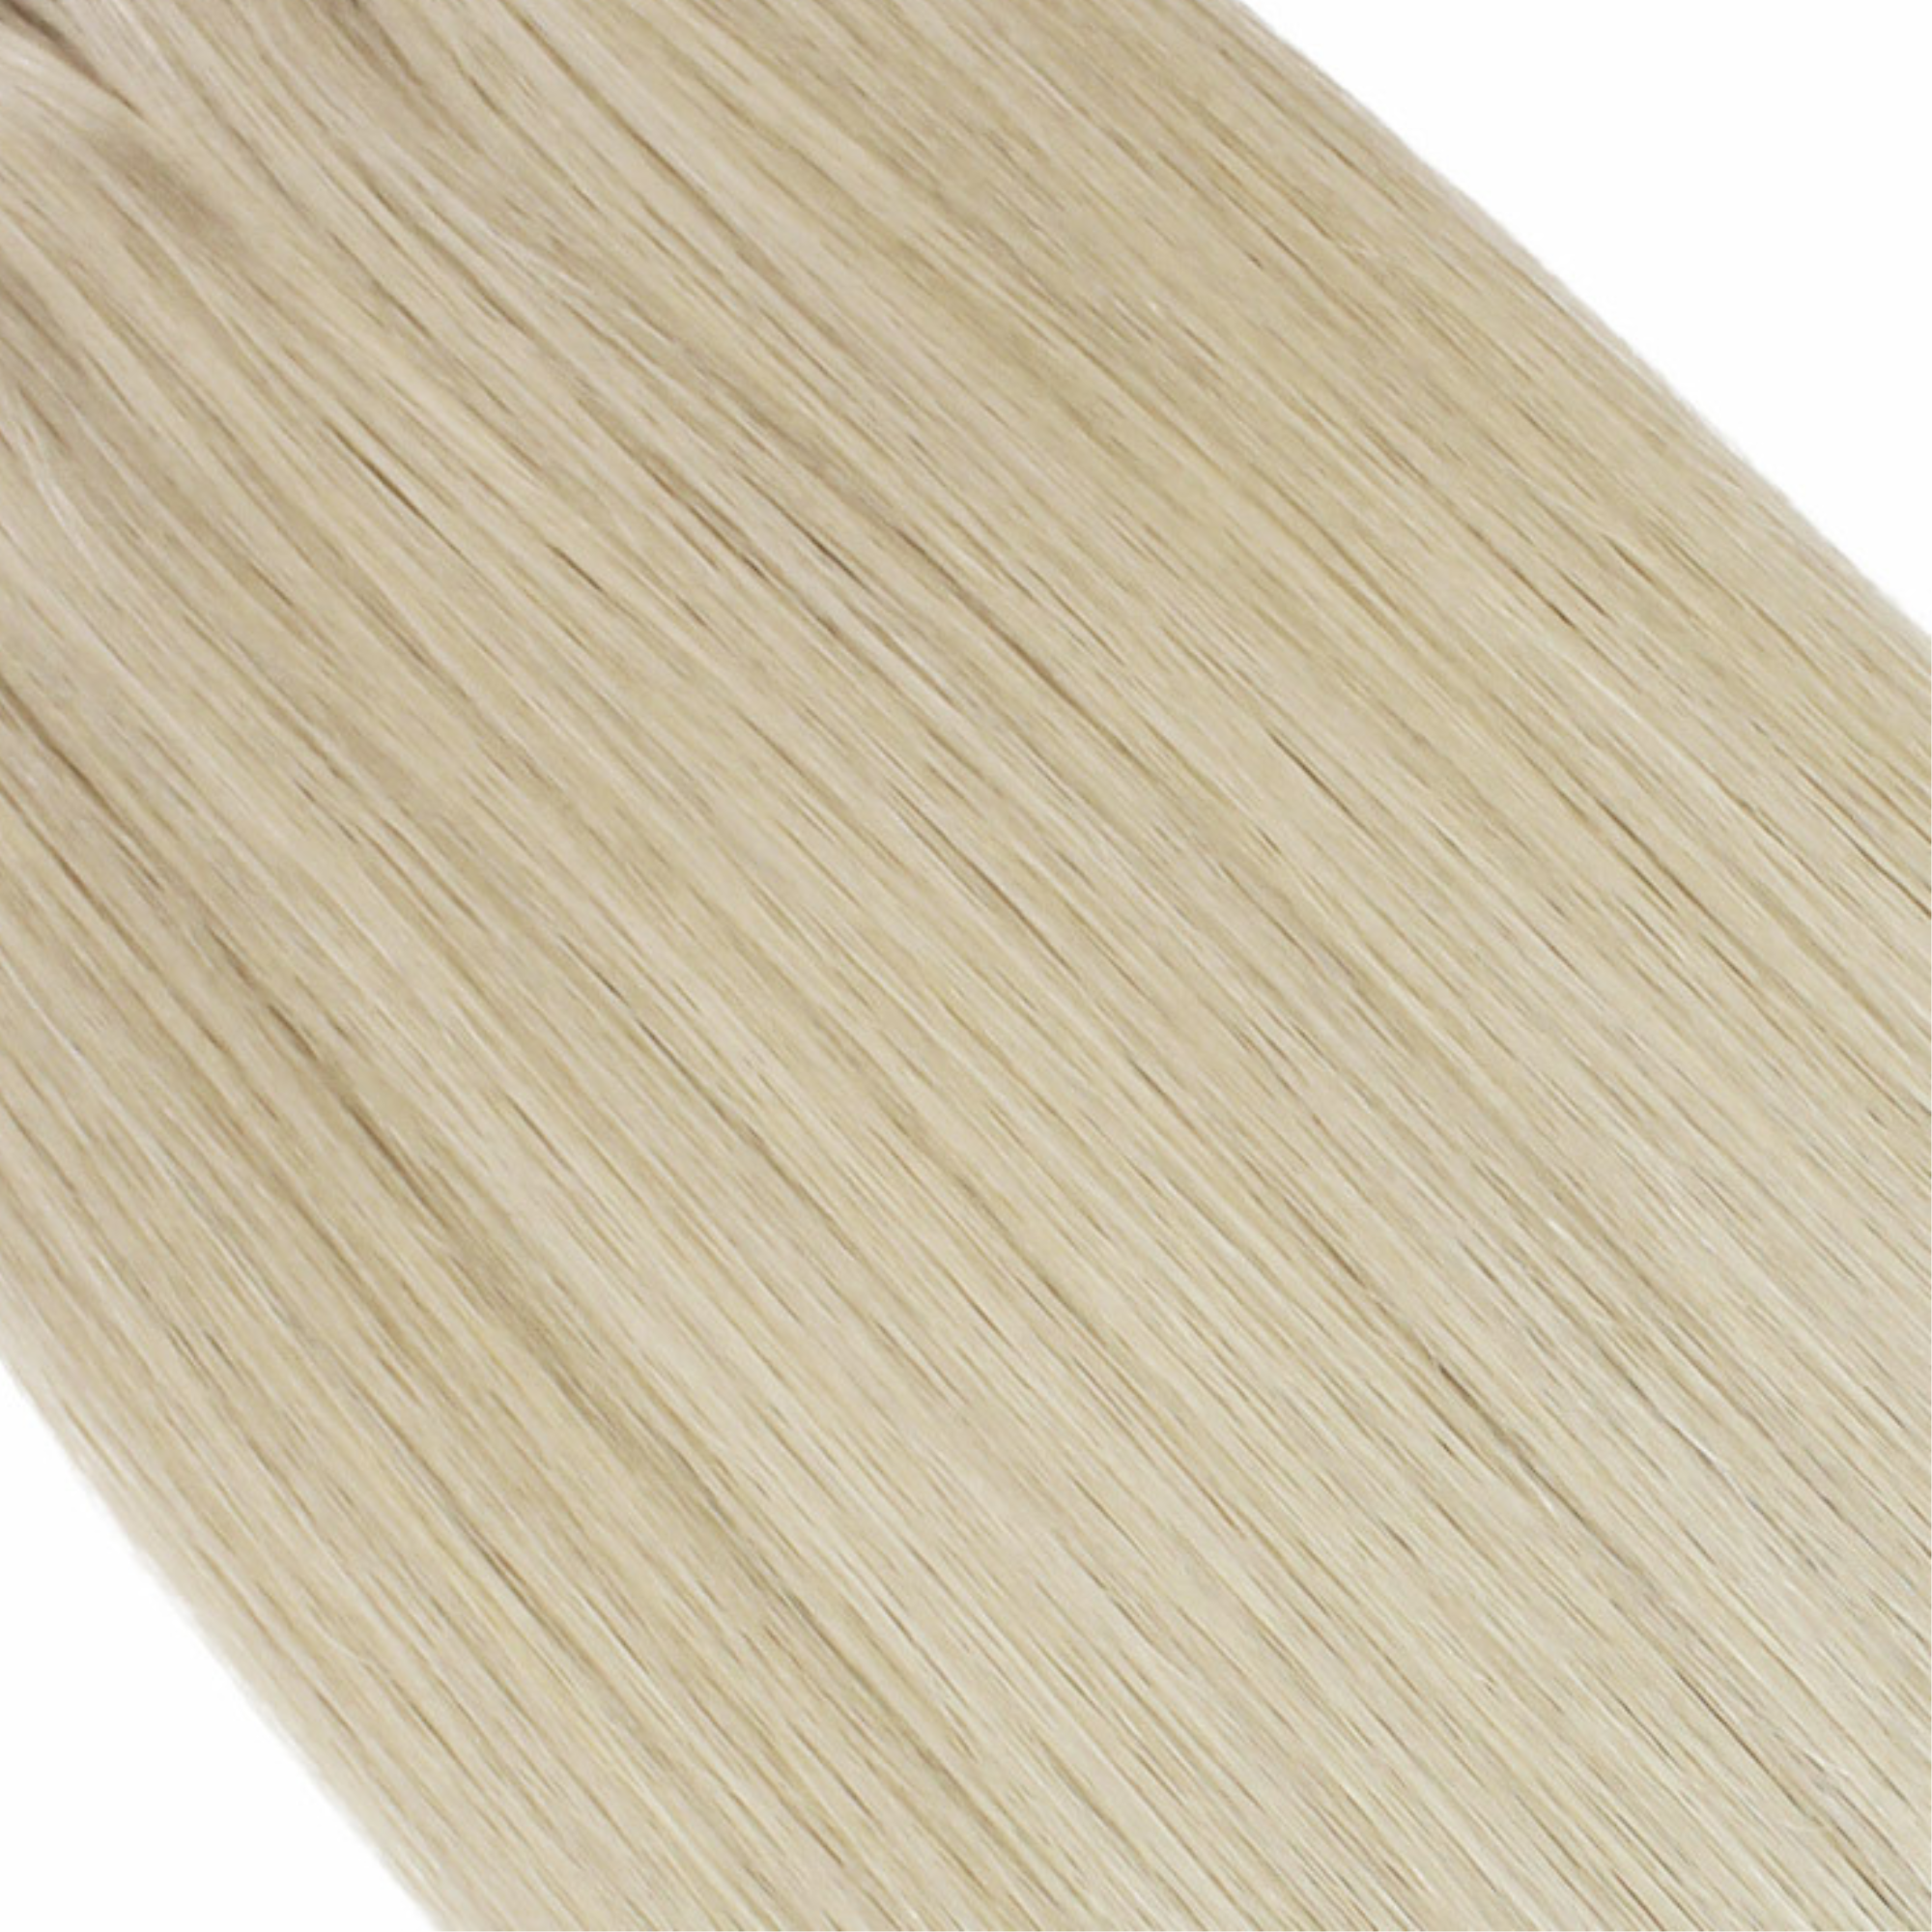 "hair rehab london 18" weft hair extensions shade swatch titled ice blonde"